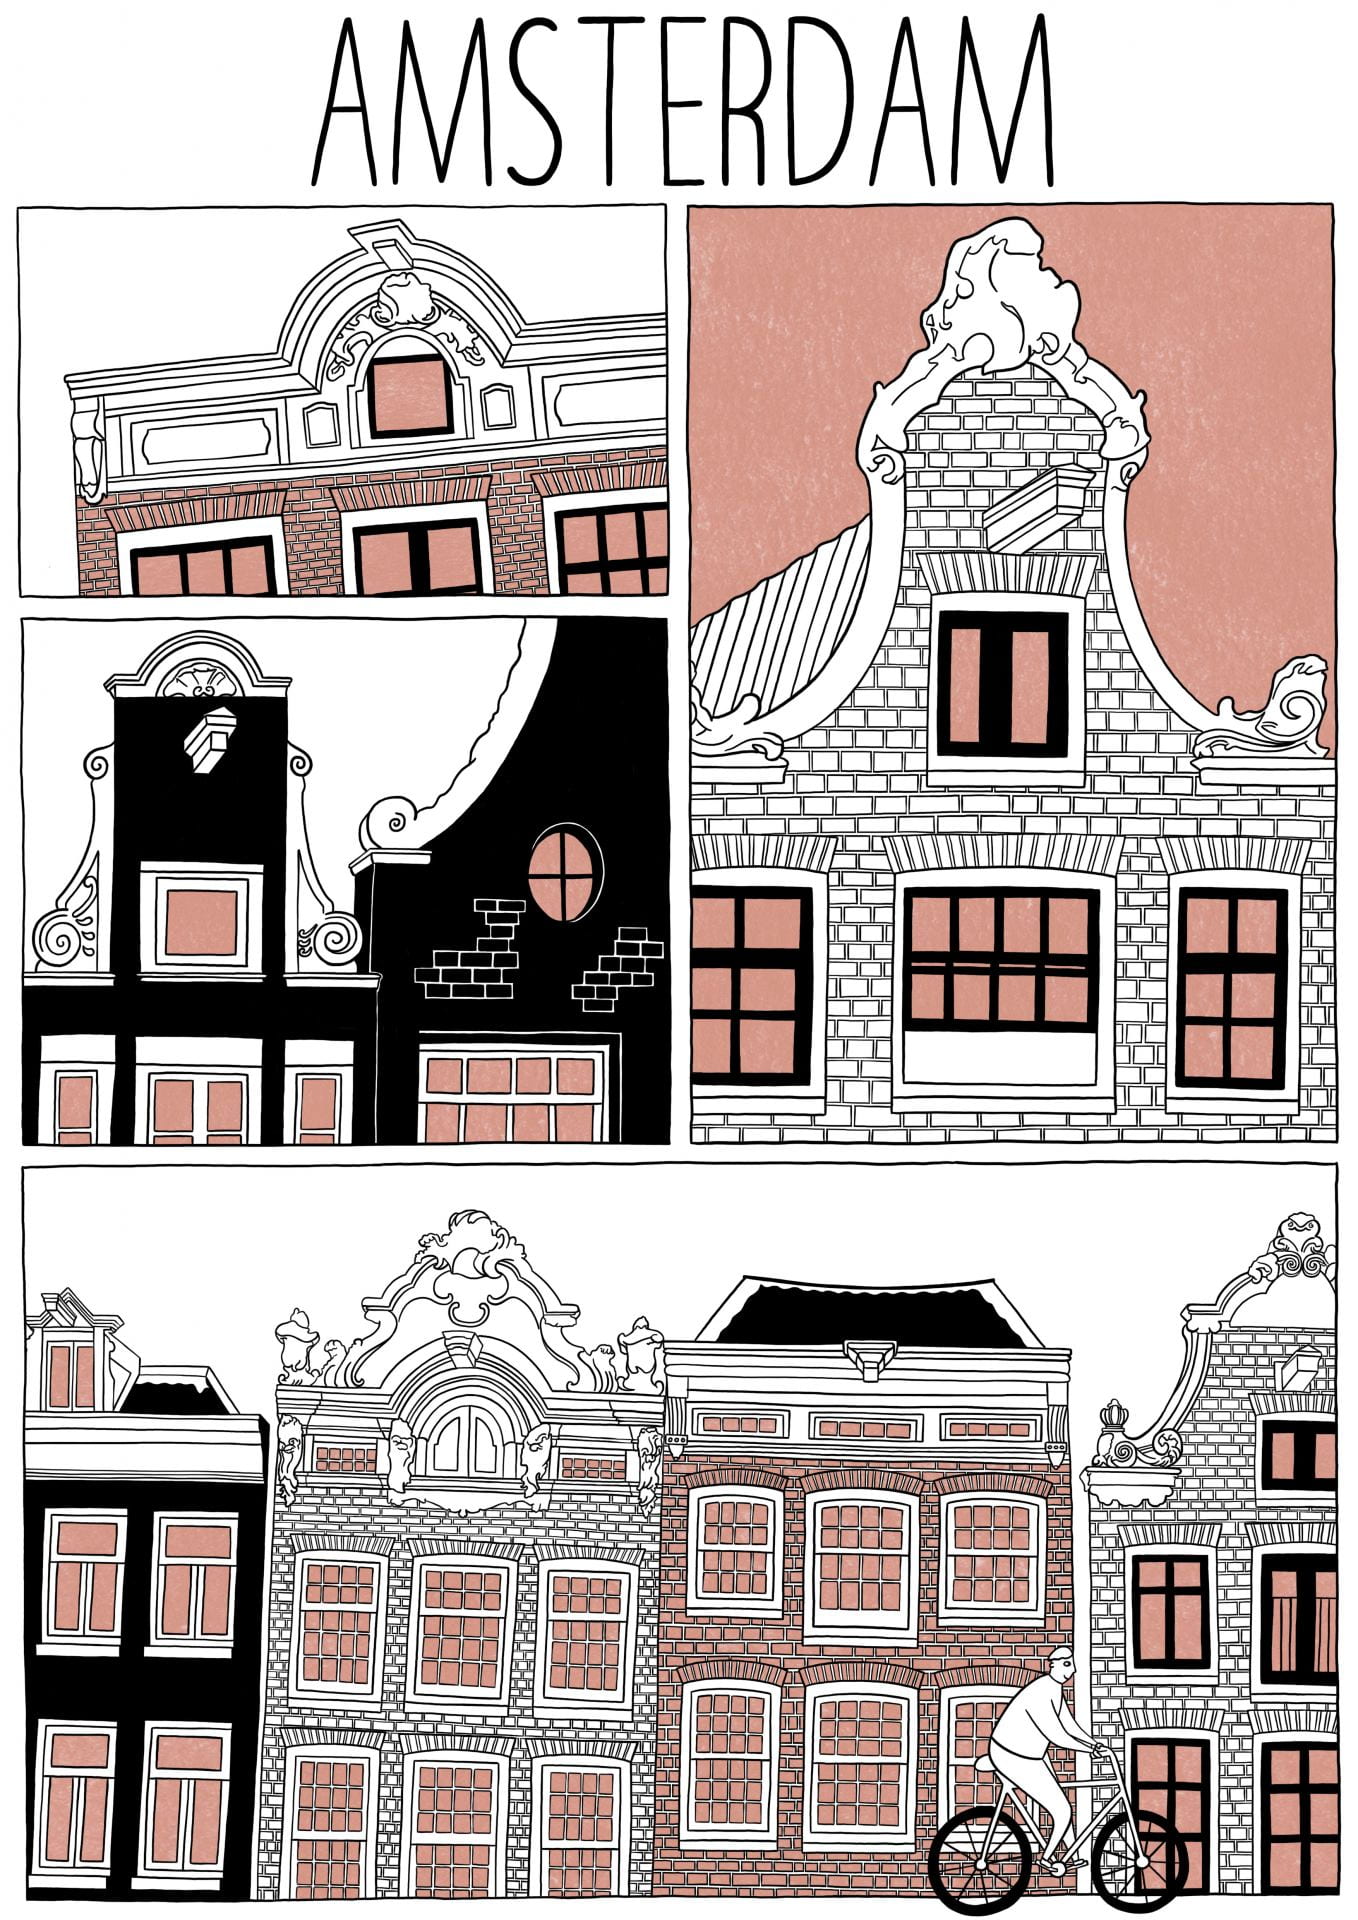 Illustration. A selection buildings rendered in different shades of black and pink. Title reads: 'Amsterdam'.